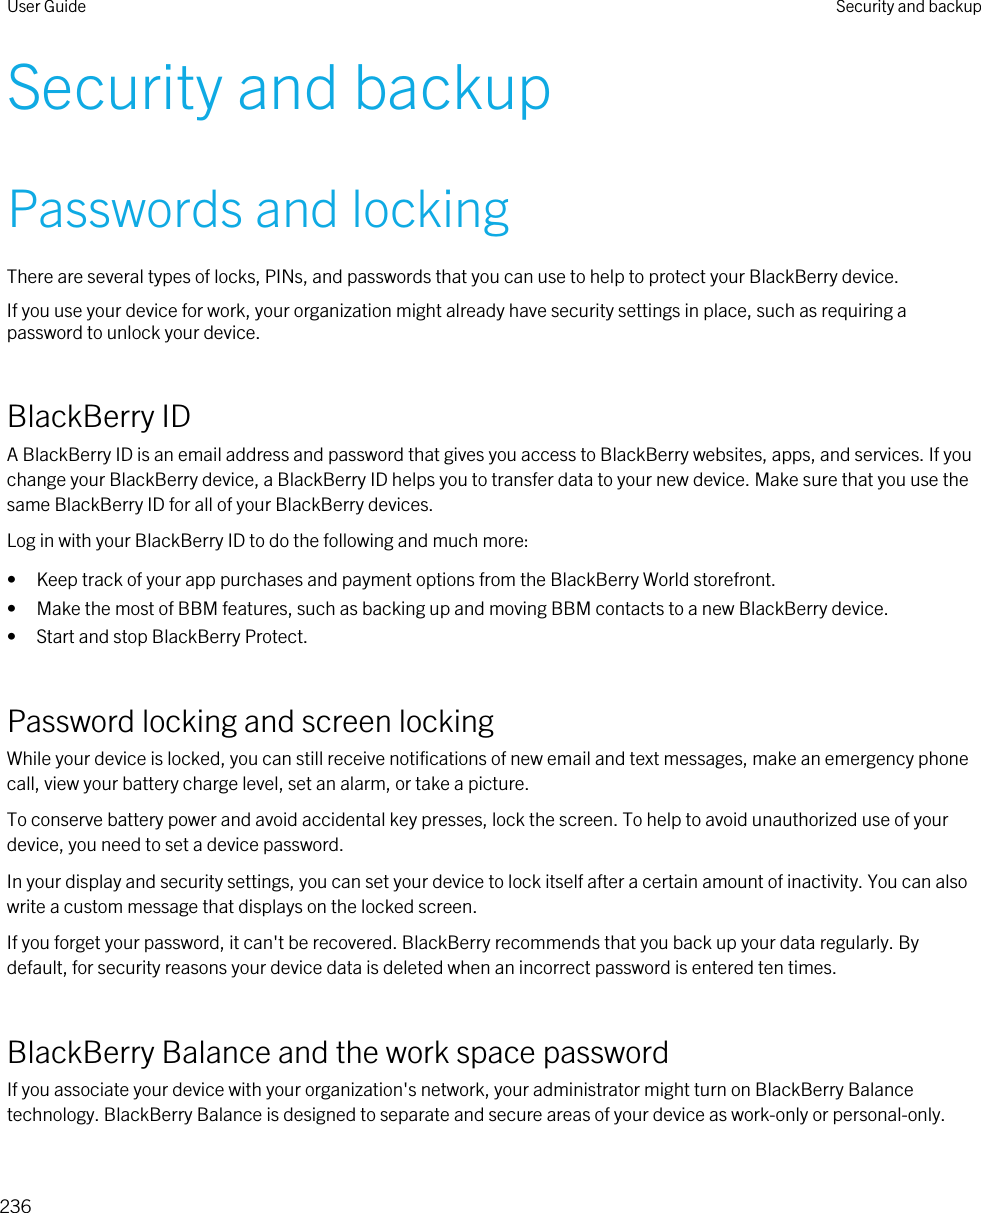 Security and backupPasswords and lockingThere are several types of locks, PINs, and passwords that you can use to help to protect your BlackBerry device.If you use your device for work, your organization might already have security settings in place, such as requiring a password to unlock your device.BlackBerry IDA BlackBerry ID is an email address and password that gives you access to BlackBerry websites, apps, and services. If you change your BlackBerry device, a BlackBerry ID helps you to transfer data to your new device. Make sure that you use the same BlackBerry ID for all of your BlackBerry devices.Log in with your BlackBerry ID to do the following and much more:• Keep track of your app purchases and payment options from the BlackBerry World storefront.• Make the most of BBM features, such as backing up and moving BBM contacts to a new BlackBerry device.• Start and stop BlackBerry Protect.Password locking and screen lockingWhile your device is locked, you can still receive notifications of new email and text messages, make an emergency phone call, view your battery charge level, set an alarm, or take a picture.To conserve battery power and avoid accidental key presses, lock the screen. To help to avoid unauthorized use of your device, you need to set a device password.In your display and security settings, you can set your device to lock itself after a certain amount of inactivity. You can also write a custom message that displays on the locked screen.If you forget your password, it can&apos;t be recovered. BlackBerry recommends that you back up your data regularly. By default, for security reasons your device data is deleted when an incorrect password is entered ten times.BlackBerry Balance and the work space passwordIf you associate your device with your organization&apos;s network, your administrator might turn on BlackBerry Balance technology. BlackBerry Balance is designed to separate and secure areas of your device as work-only or personal-only.User Guide Security and backup236